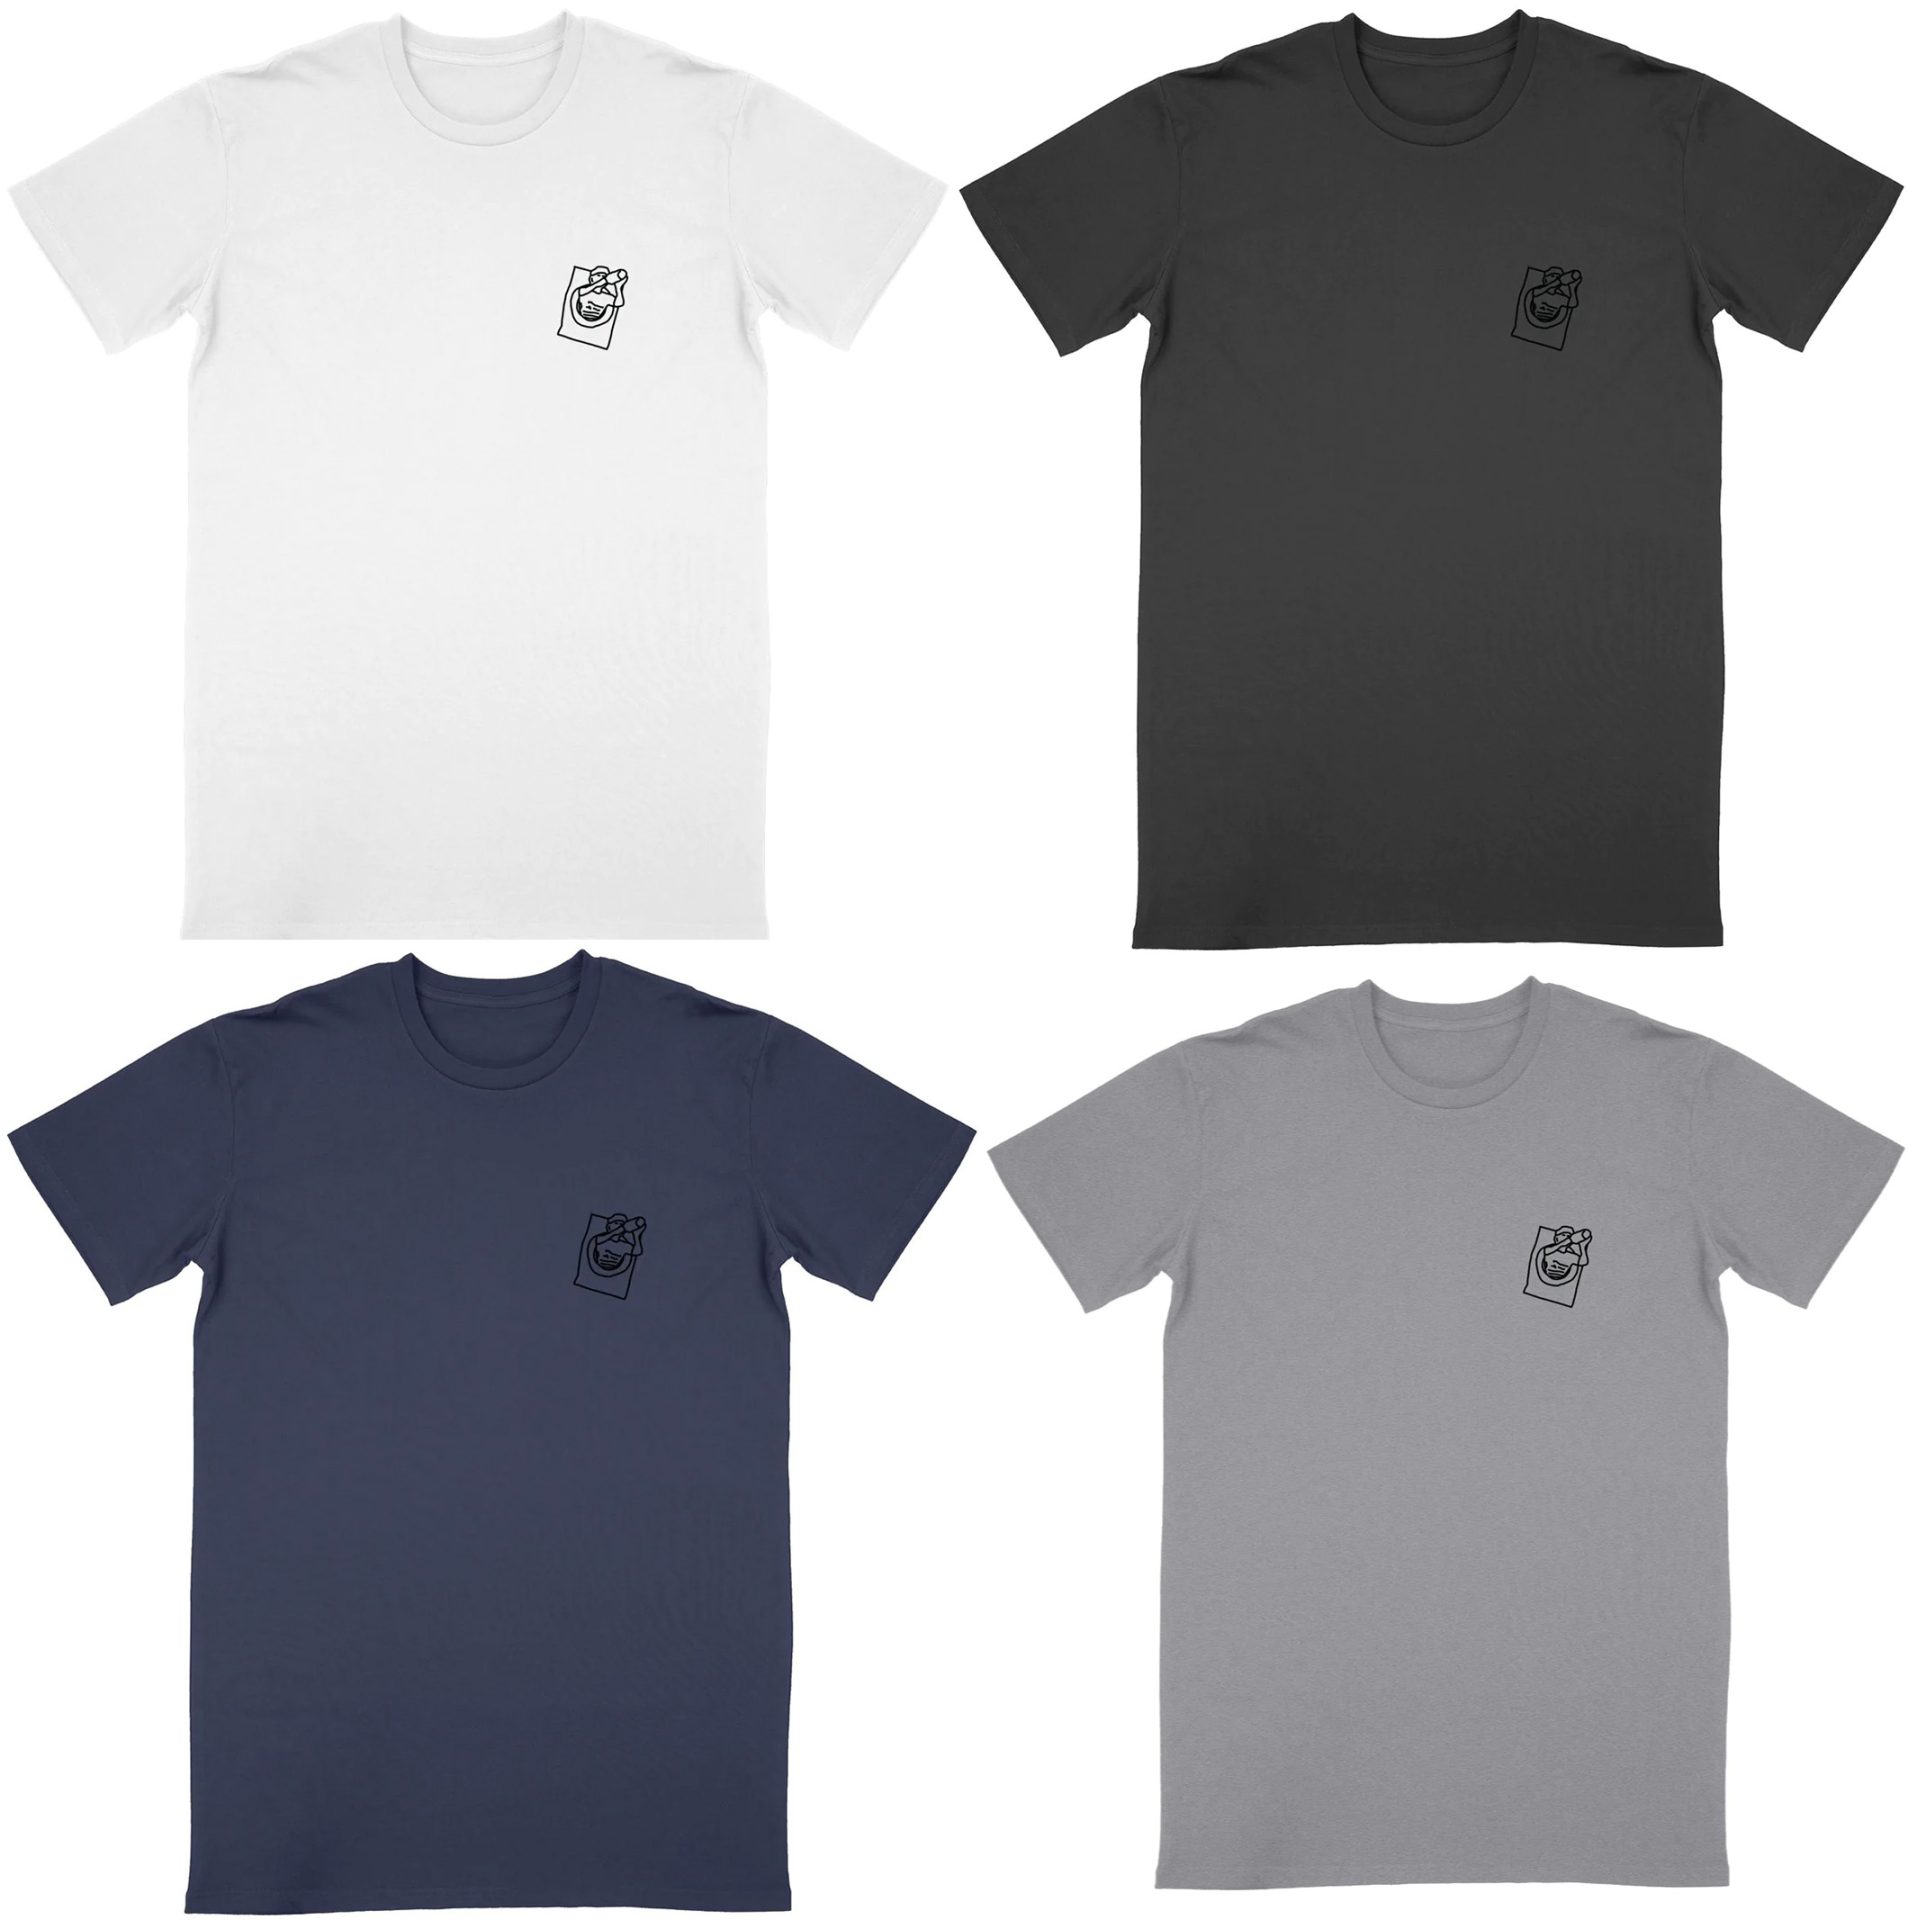 Four Spin Cycle t-shirts.